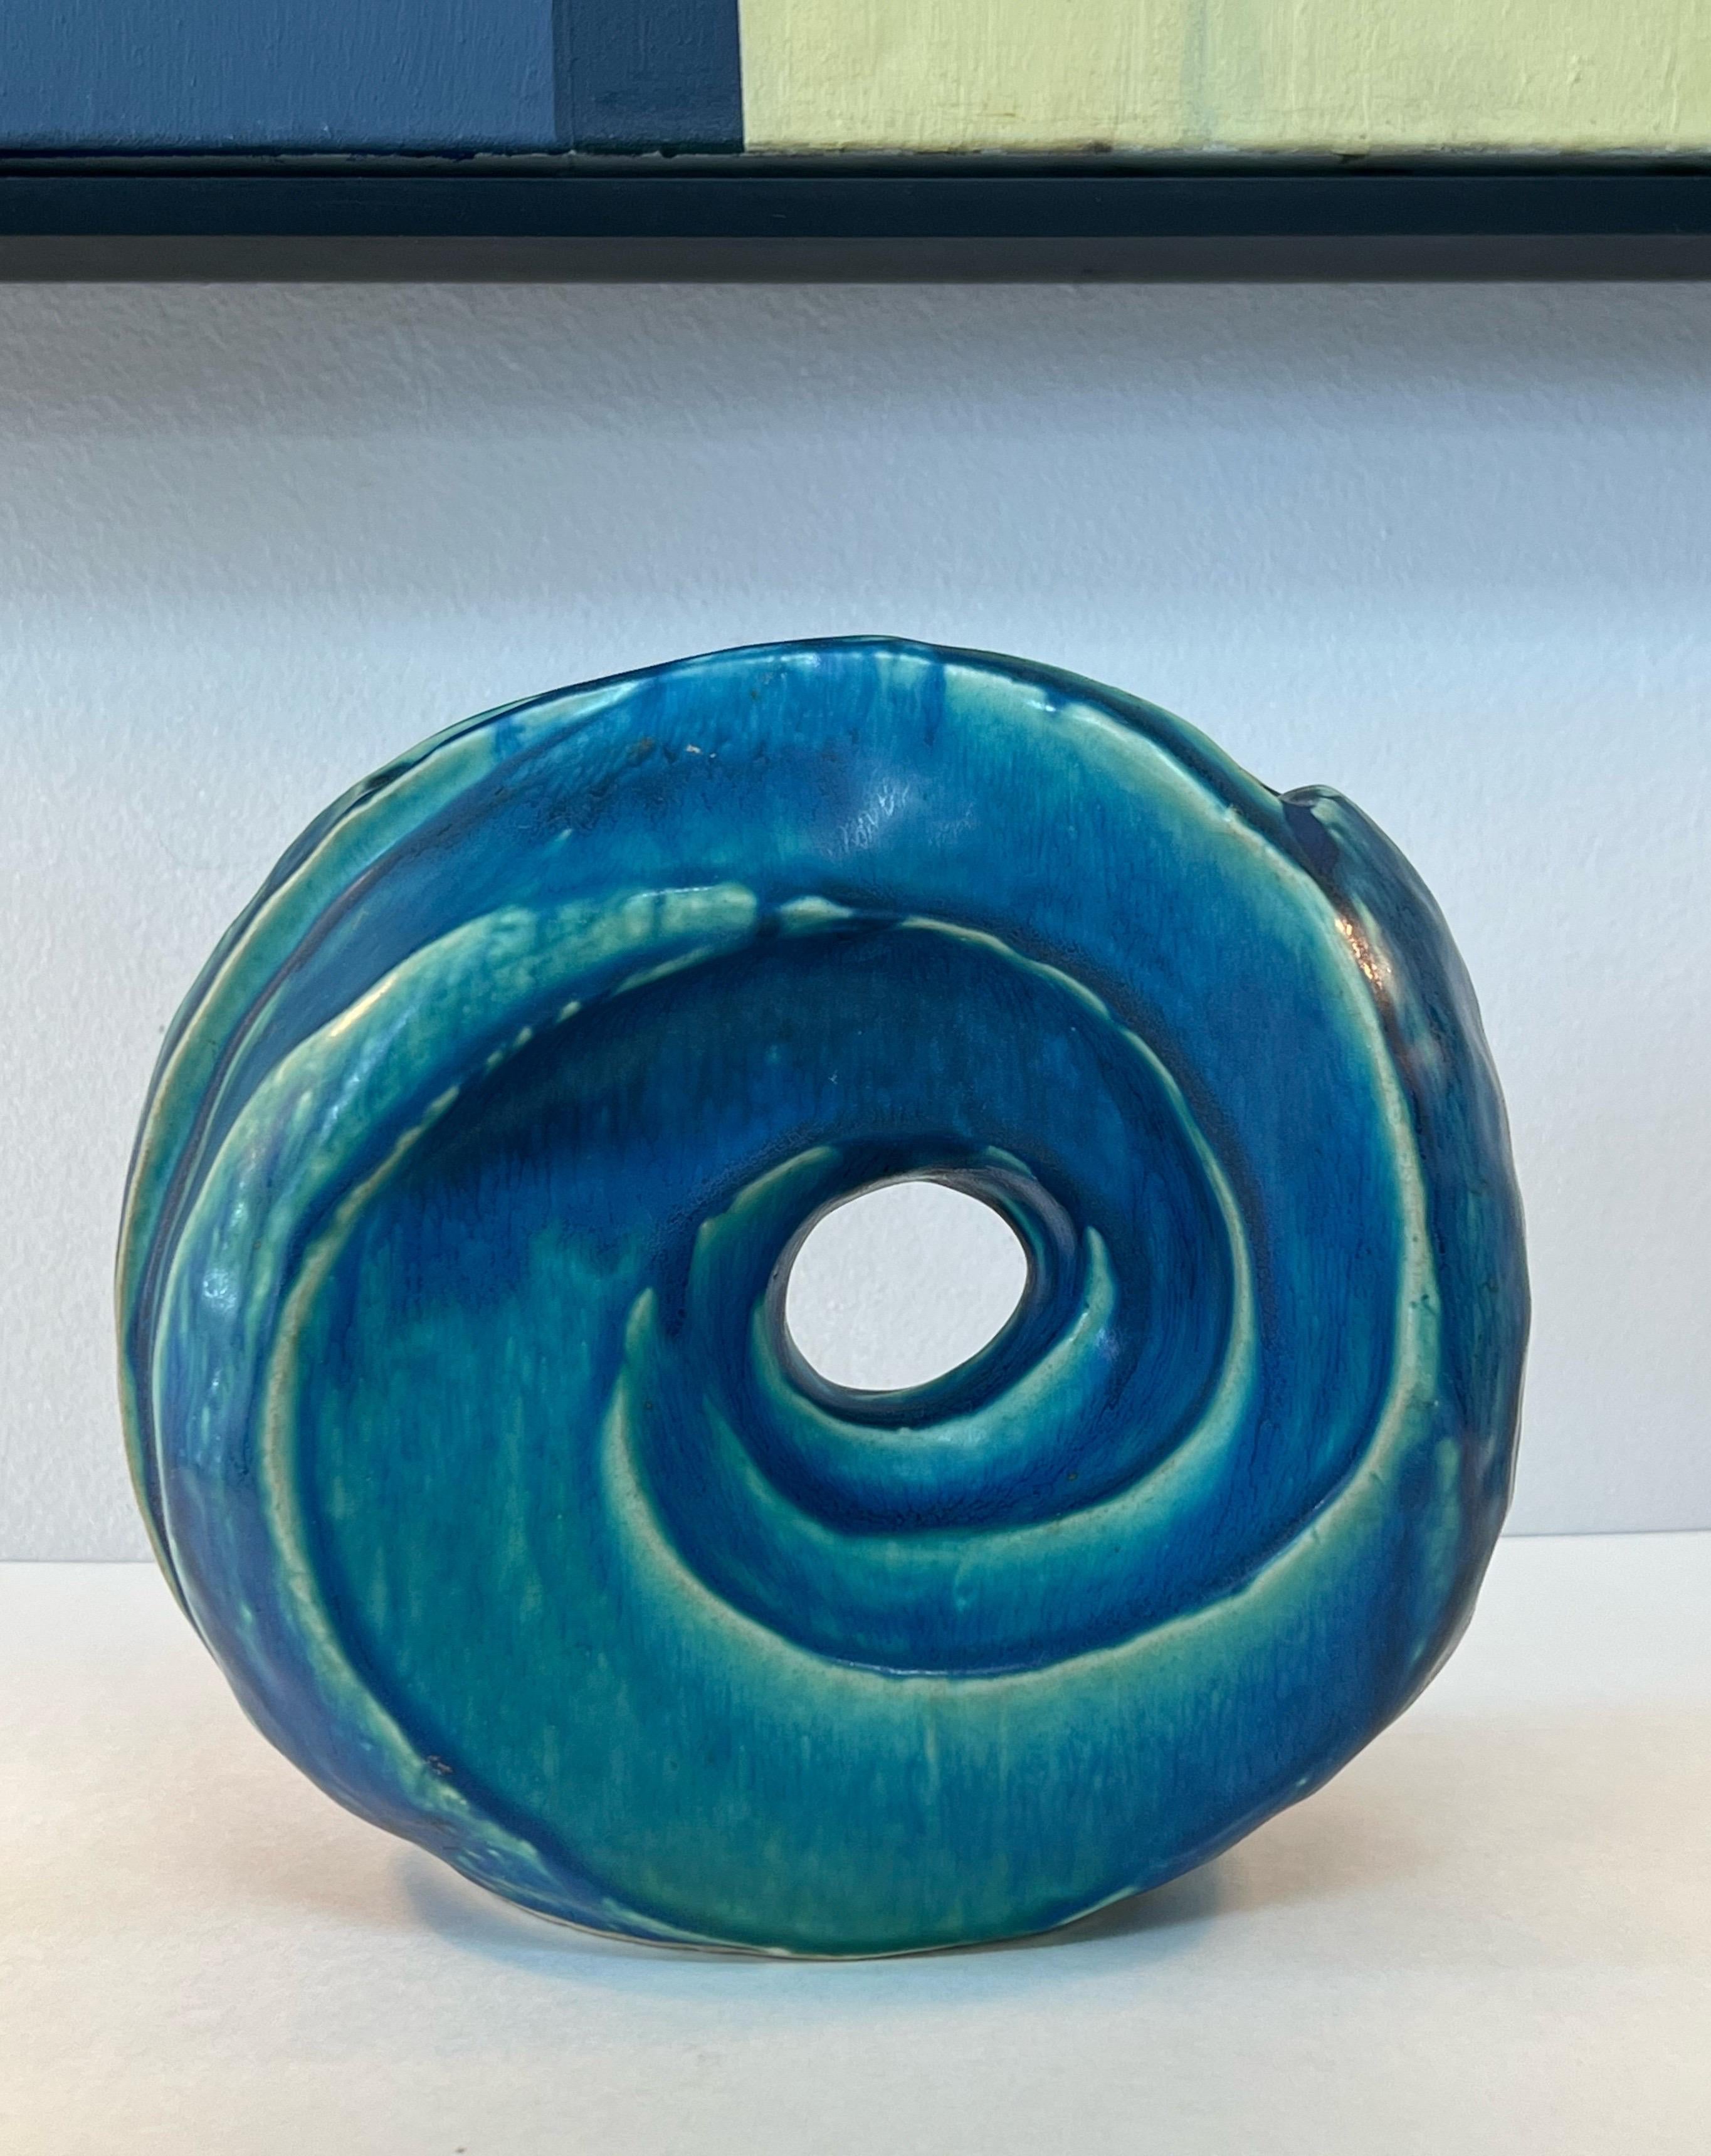 A 1930s vase with a modernist swirl design. Nice size, form and color.